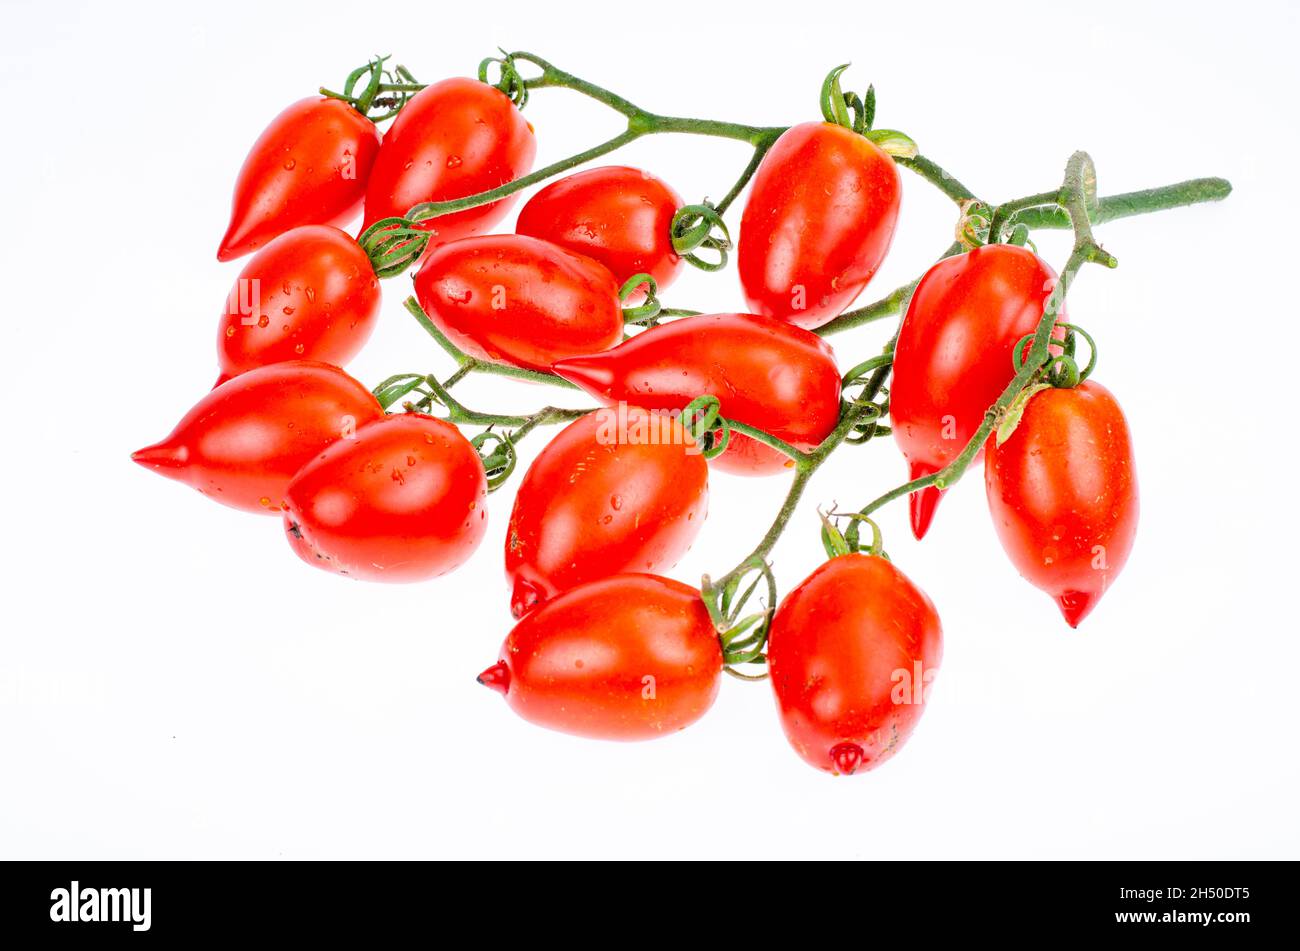 https://c8.alamy.com/comp/2H50DT5/branch-of-ripe-red-elongated-tomatoes-studio-photo-2H50DT5.jpg